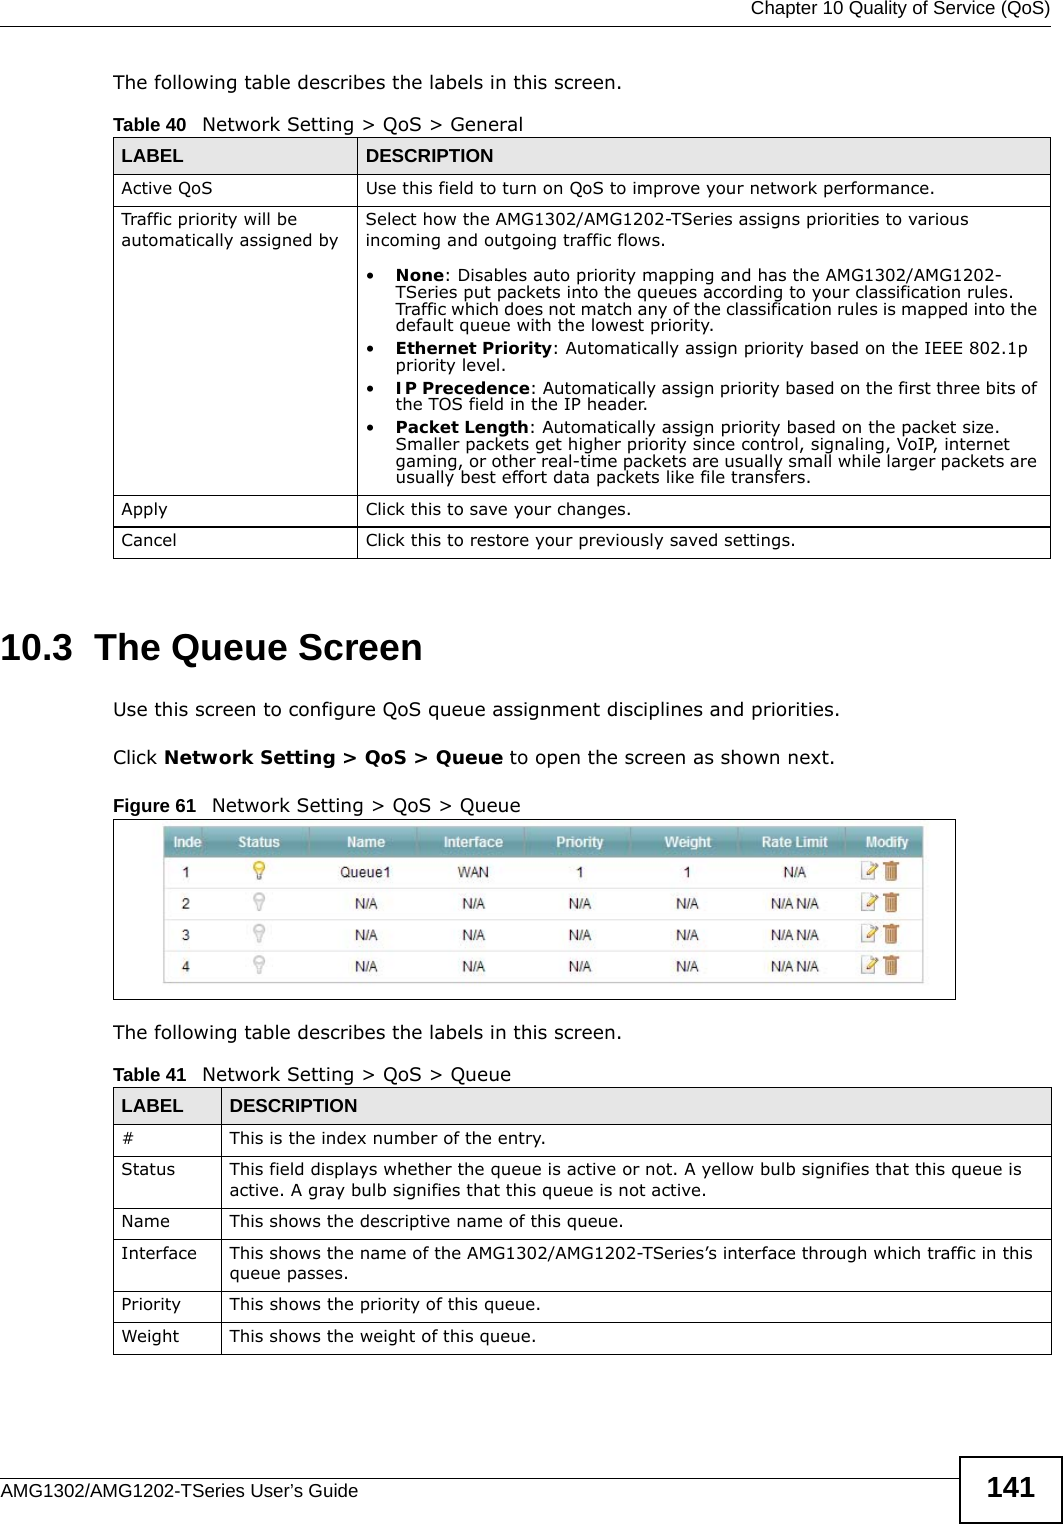  Chapter 10 Quality of Service (QoS)AMG1302/AMG1202-TSeries User’s Guide 141The following table describes the labels in this screen. 10.3  The Queue ScreenUse this screen to configure QoS queue assignment disciplines and priorities.Click Network Setting &gt; QoS &gt; Queue to open the screen as shown next.Figure 61   Network Setting &gt; QoS &gt; QueueThe following table describes the labels in this screen. Table 40   Network Setting &gt; QoS &gt; GeneralLABEL DESCRIPTIONActive QoS Use this field to turn on QoS to improve your network performance.Traffic priority will be automatically assigned by Select how the AMG1302/AMG1202-TSeries assigns priorities to various incoming and outgoing traffic flows.•None: Disables auto priority mapping and has the AMG1302/AMG1202-TSeries put packets into the queues according to your classification rules. Traffic which does not match any of the classification rules is mapped into the default queue with the lowest priority.•Ethernet Priority: Automatically assign priority based on the IEEE 802.1p priority level.•IP Precedence: Automatically assign priority based on the first three bits of the TOS field in the IP header.•Packet Length: Automatically assign priority based on the packet size. Smaller packets get higher priority since control, signaling, VoIP, internet gaming, or other real-time packets are usually small while larger packets are usually best effort data packets like file transfers.Apply Click this to save your changes.Cancel Click this to restore your previously saved settings.Table 41   Network Setting &gt; QoS &gt; QueueLABEL DESCRIPTION#This is the index number of the entry.Status This field displays whether the queue is active or not. A yellow bulb signifies that this queue is active. A gray bulb signifies that this queue is not active.Name This shows the descriptive name of this queue.Interface This shows the name of the AMG1302/AMG1202-TSeries’s interface through which traffic in this queue passes.Priority This shows the priority of this queue.Weight This shows the weight of this queue.